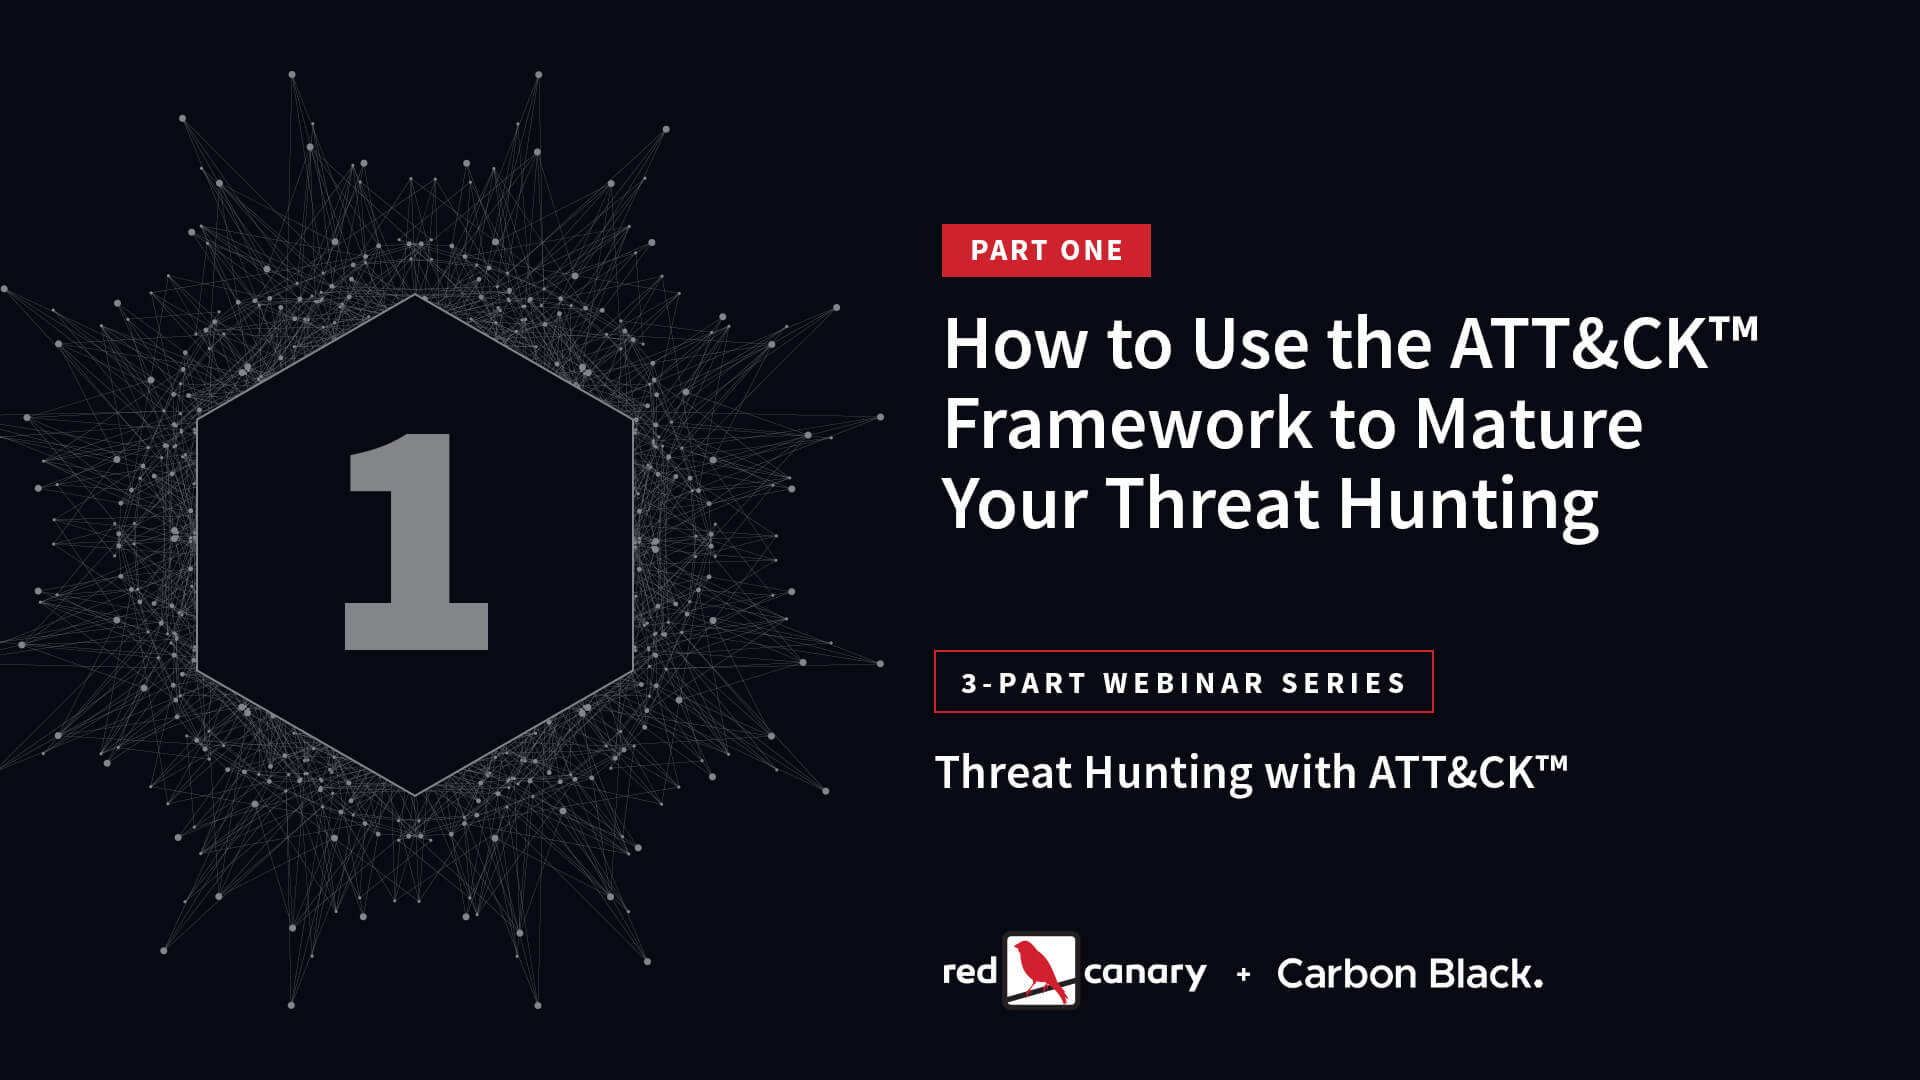 Threat Hunting with ATT&CK Theme – Part One